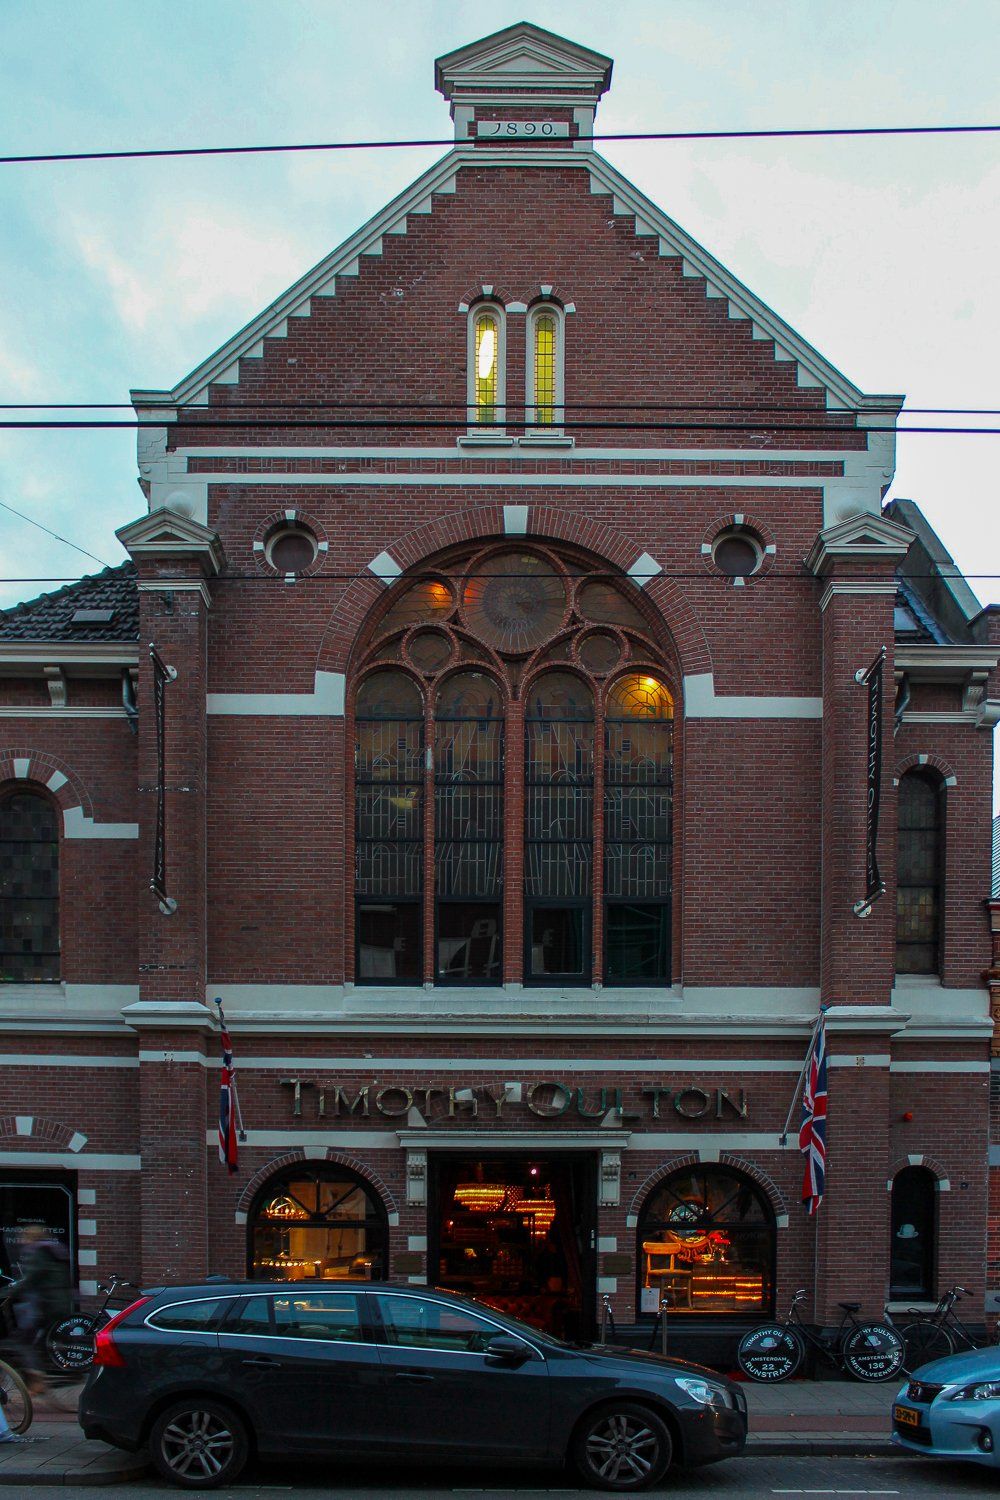 The Timothy Oulton flagship store on Amstelveenseweg in Amsterdam